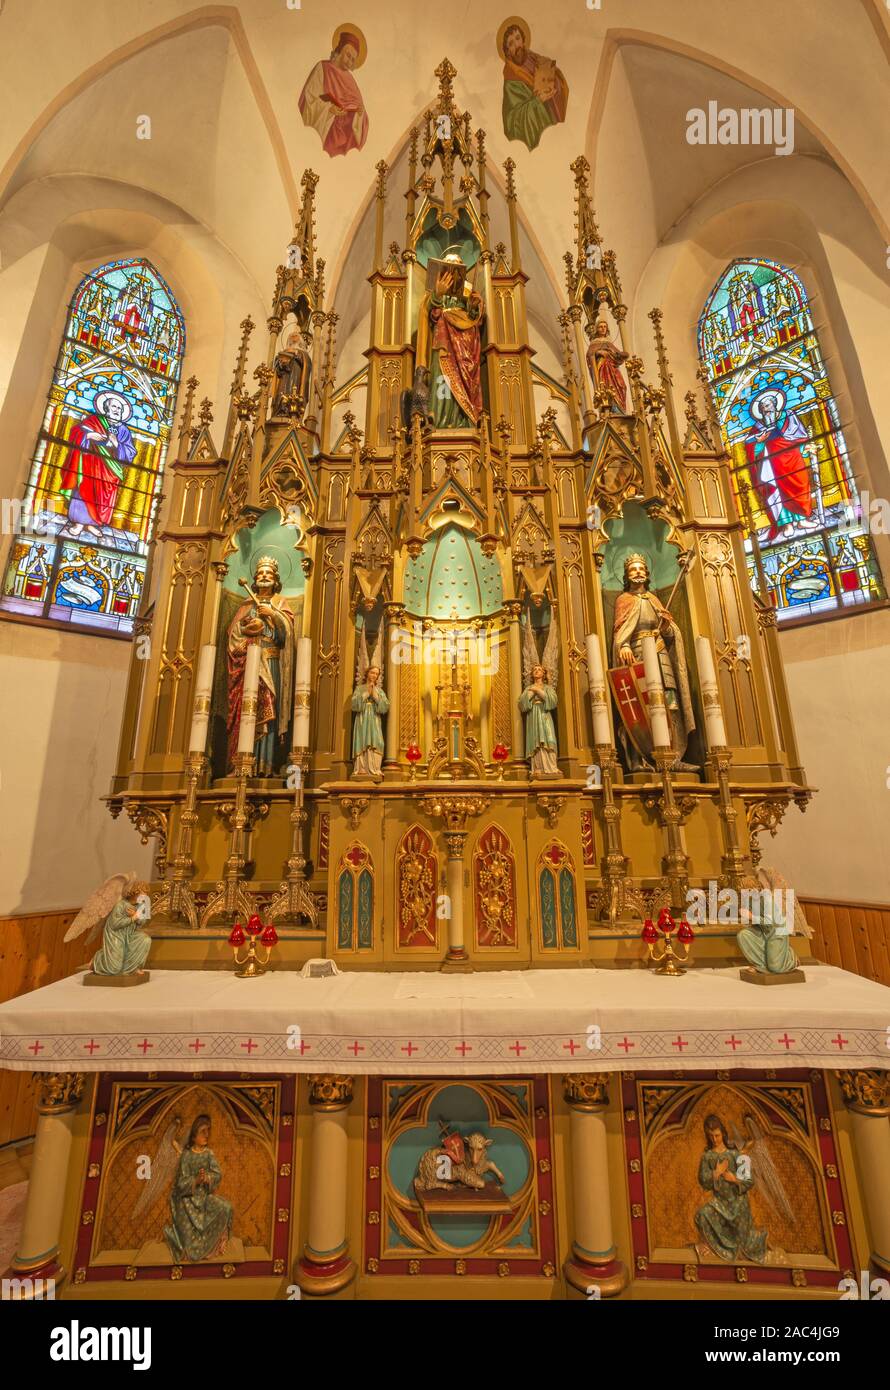 BANSKA BELA, SLOVAKIA - FEBRUARY 5, 2015: The neo gothic altar in the St. John the Evangelist church from end of 19. cent. Stock Photo